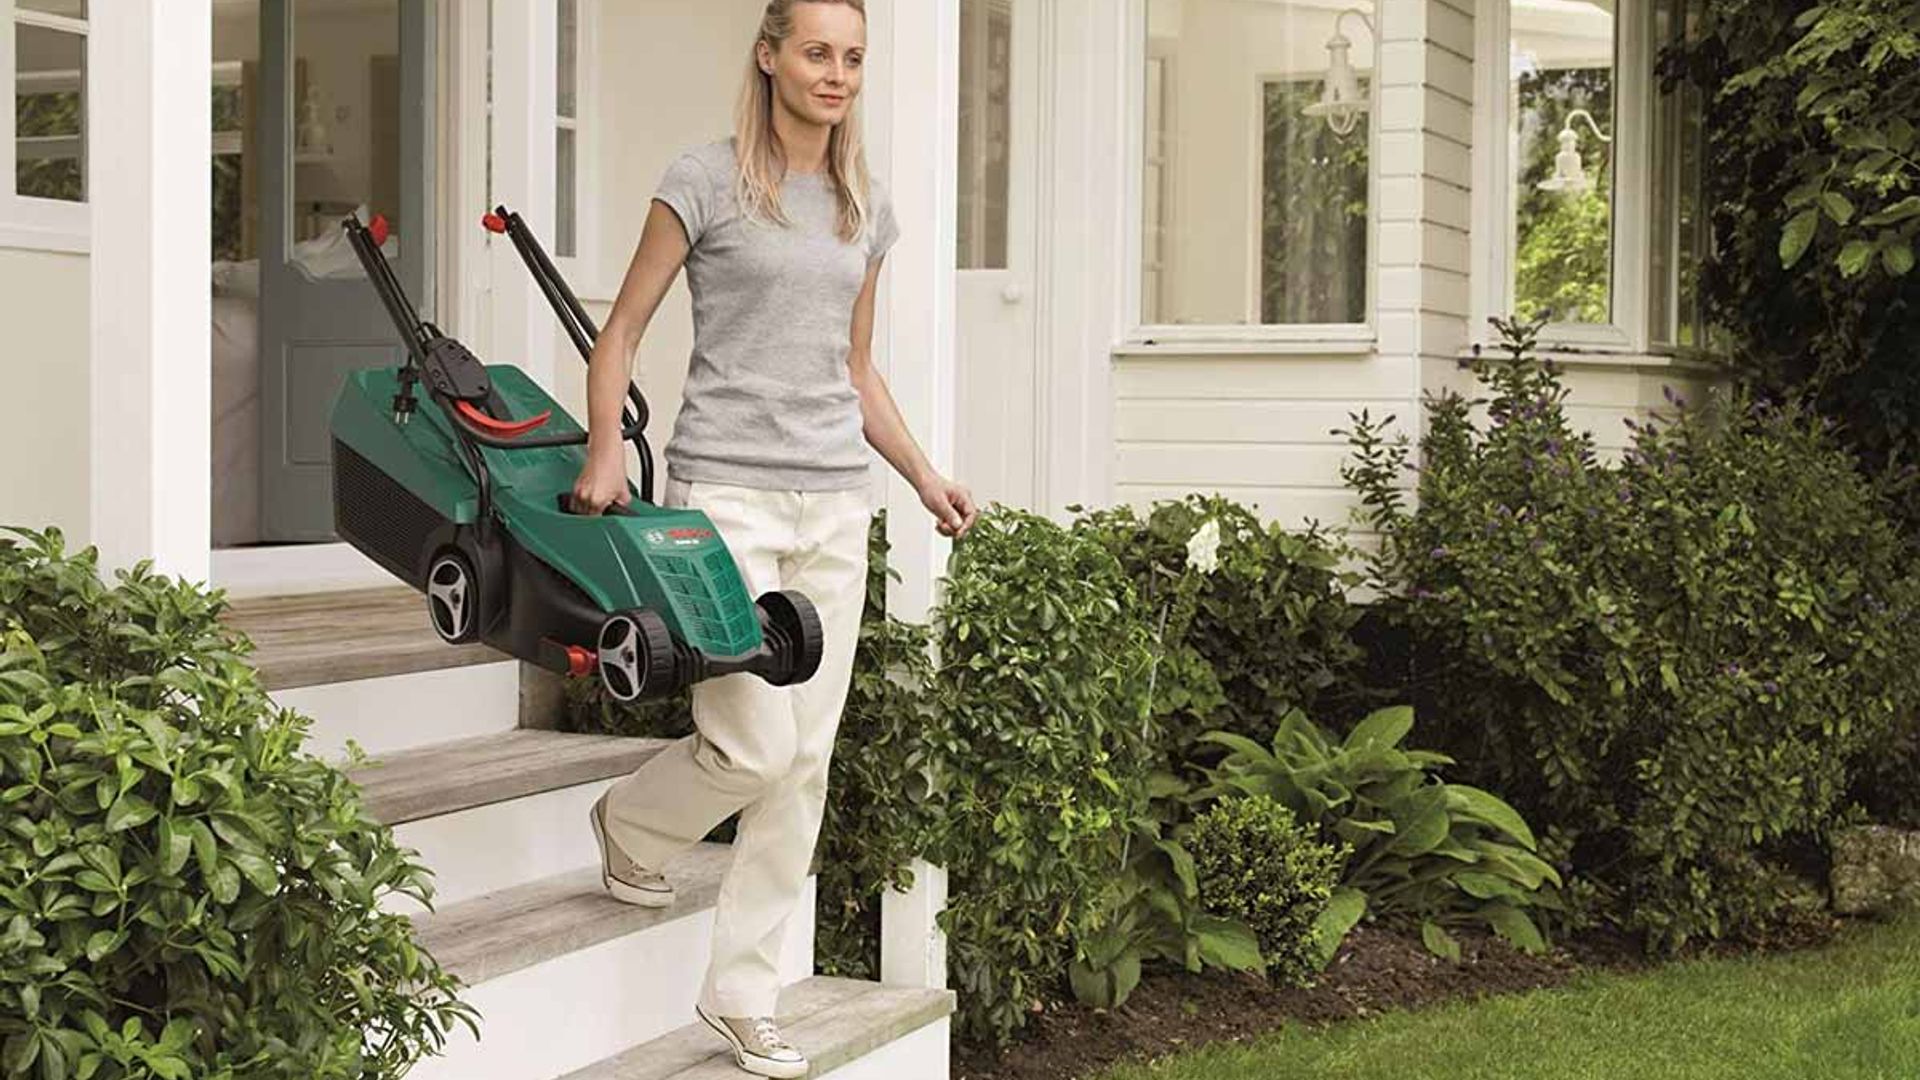 This Bosch mower will help you get the garden of dreams and it's on sale - hurry!